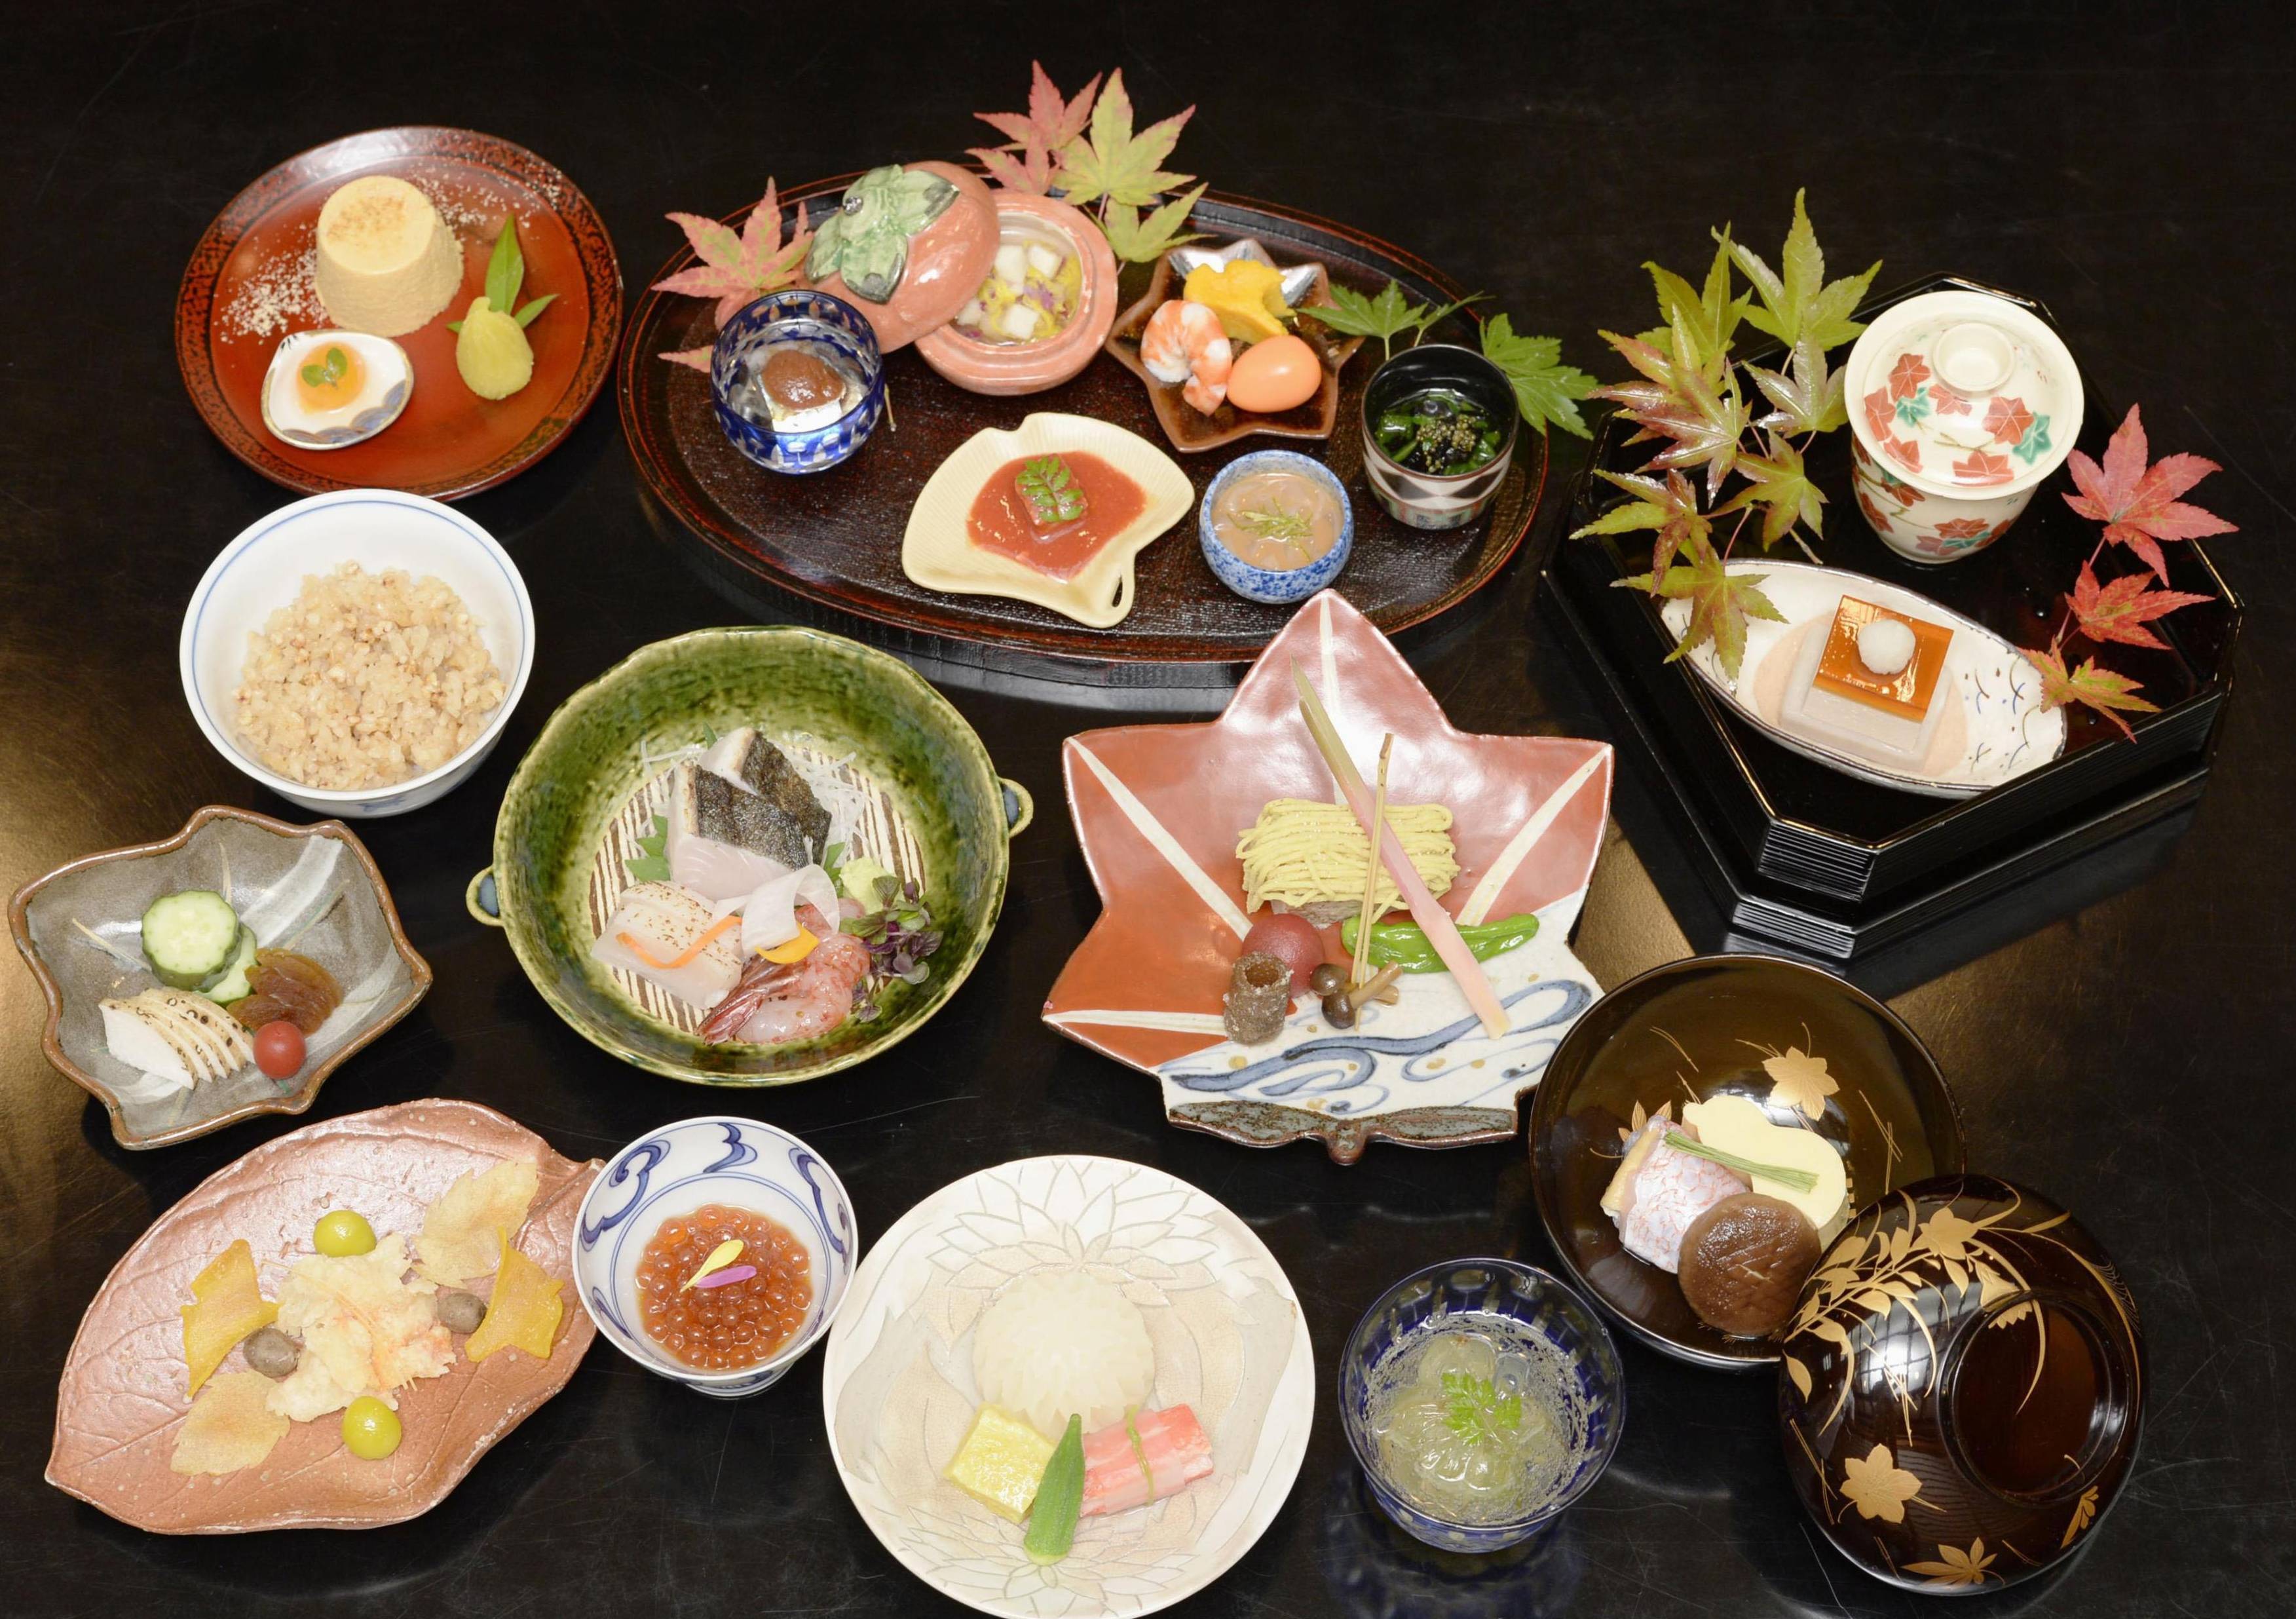 Japanese cuisine wins cultural heritage status | The Japan Times